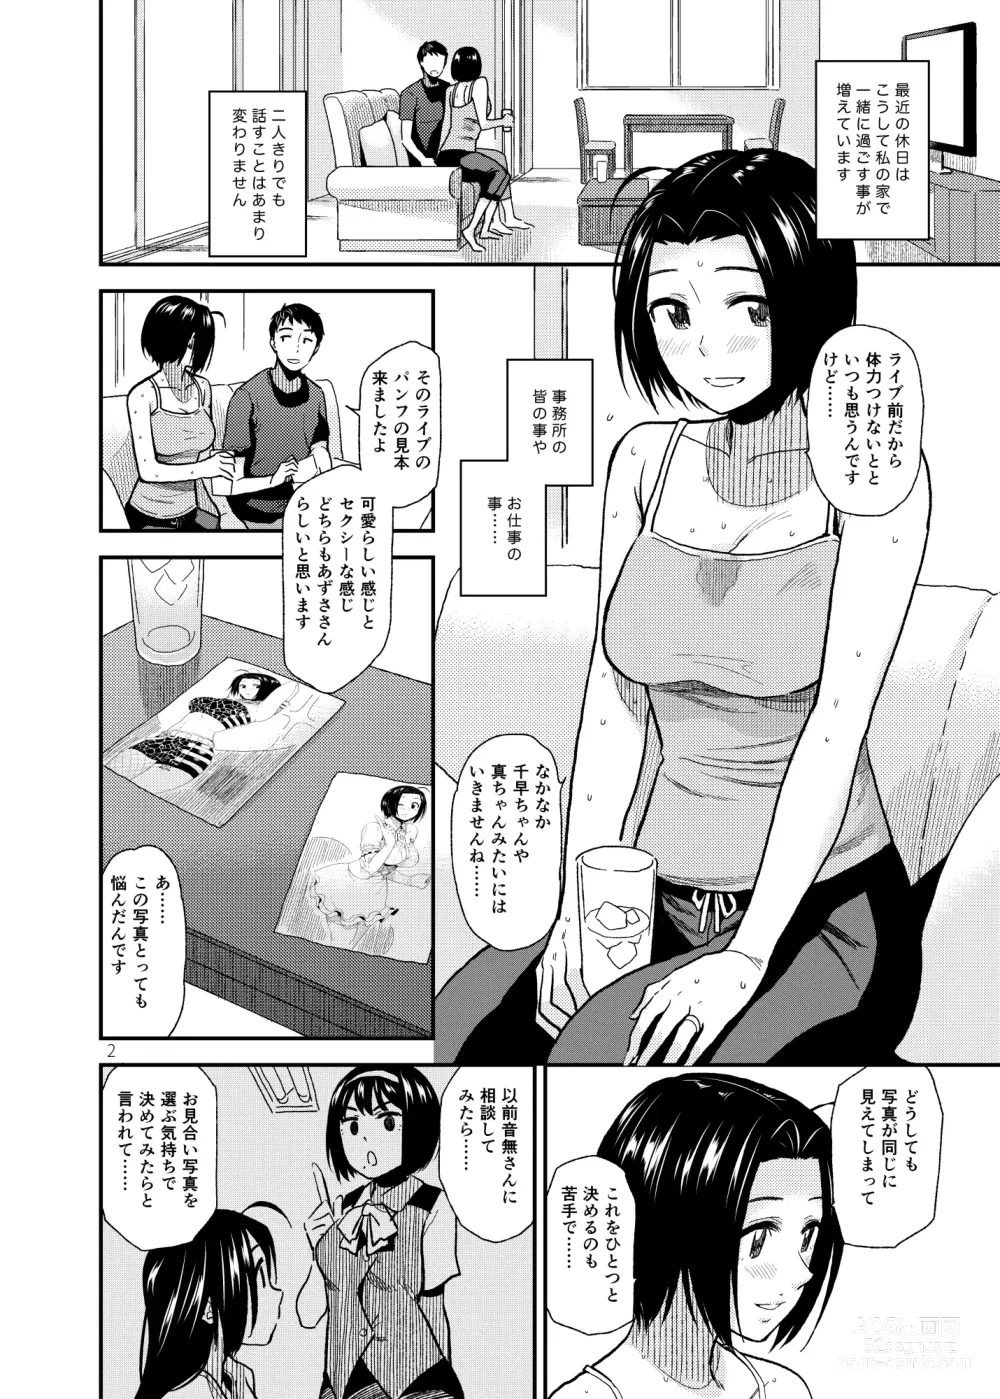 Page 3 of doujinshi Tender Time 2